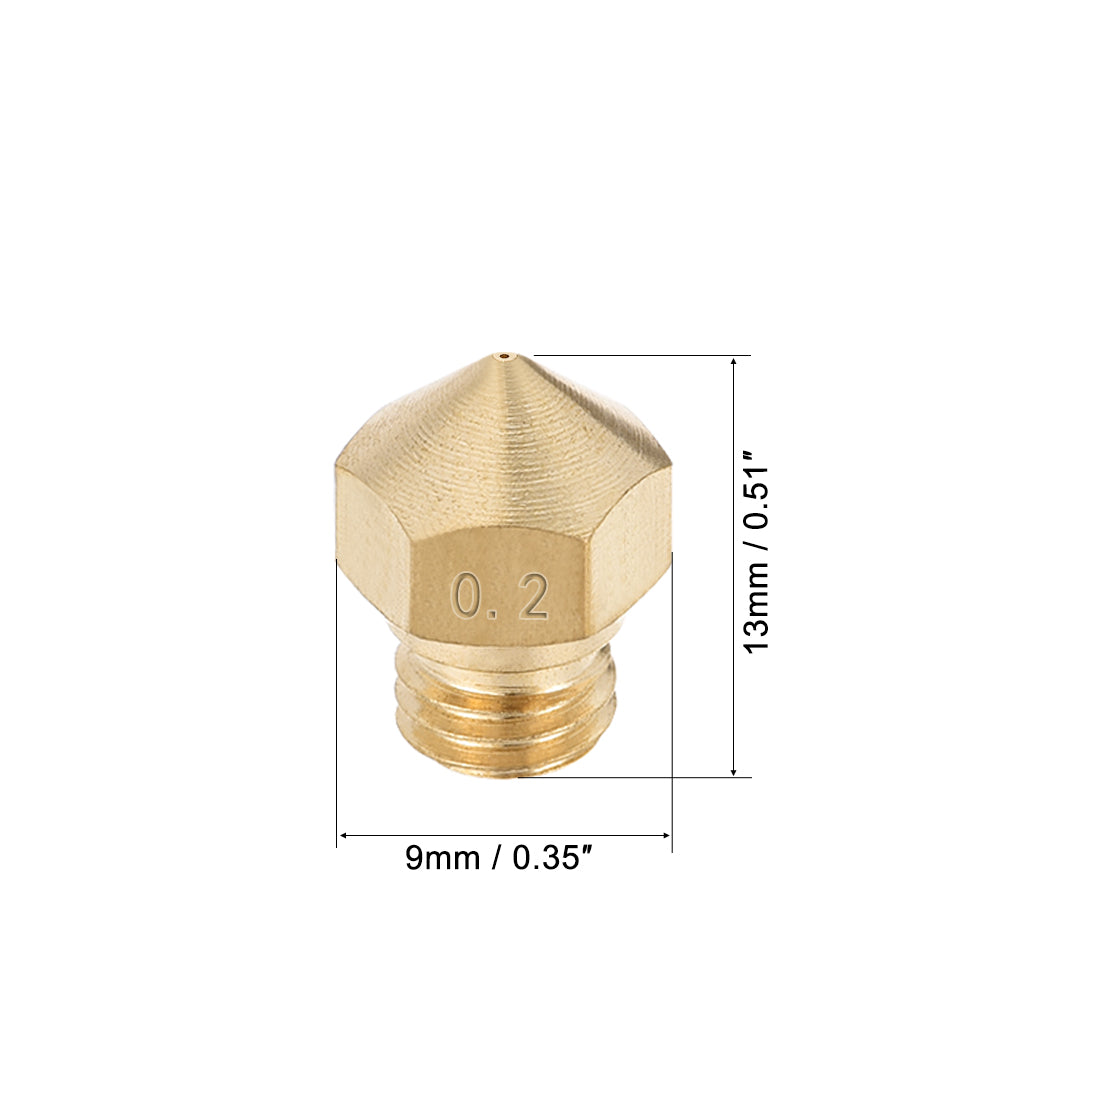 uxcell Uxcell 0.2mm 3D Printer Nozzle, Fit for MK10, for 1.75mm Filament Brass 2pcs